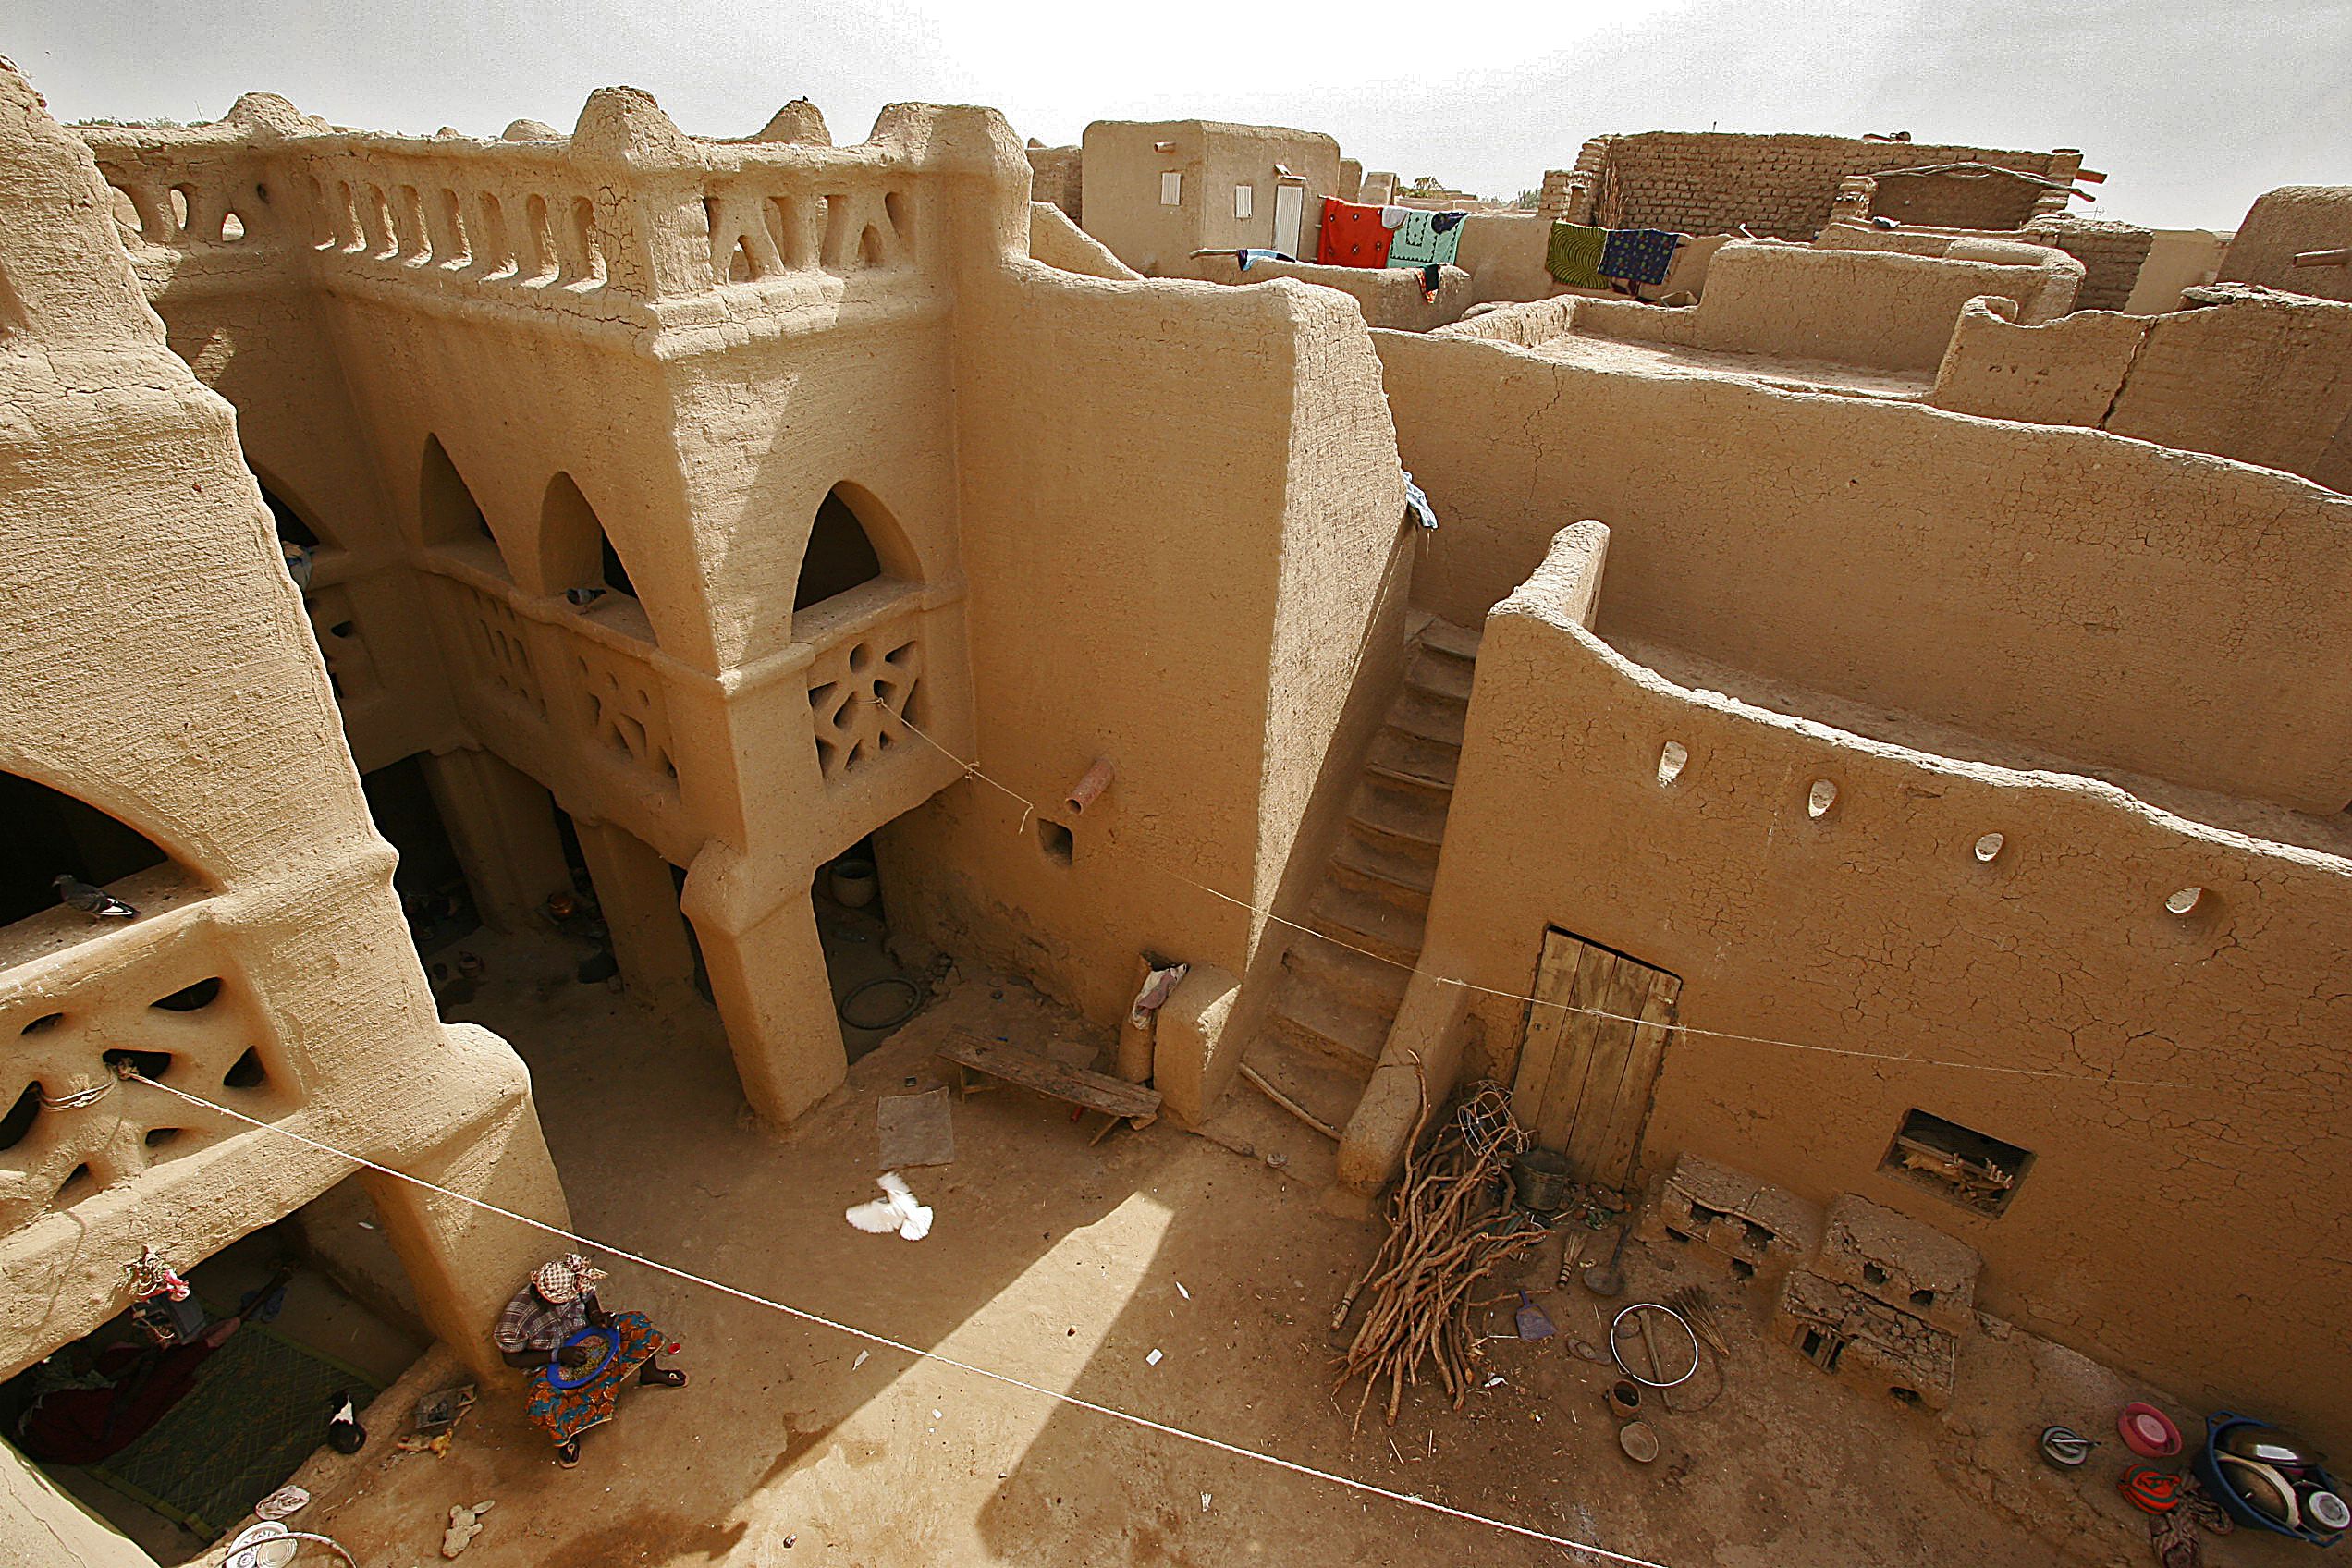 PHOTO: A woman rests in the courtyard of a large earthen mud house, in Djenne, in the Inner Niger Delta region in central Mali in this Feb. 9, 2005 file photo.